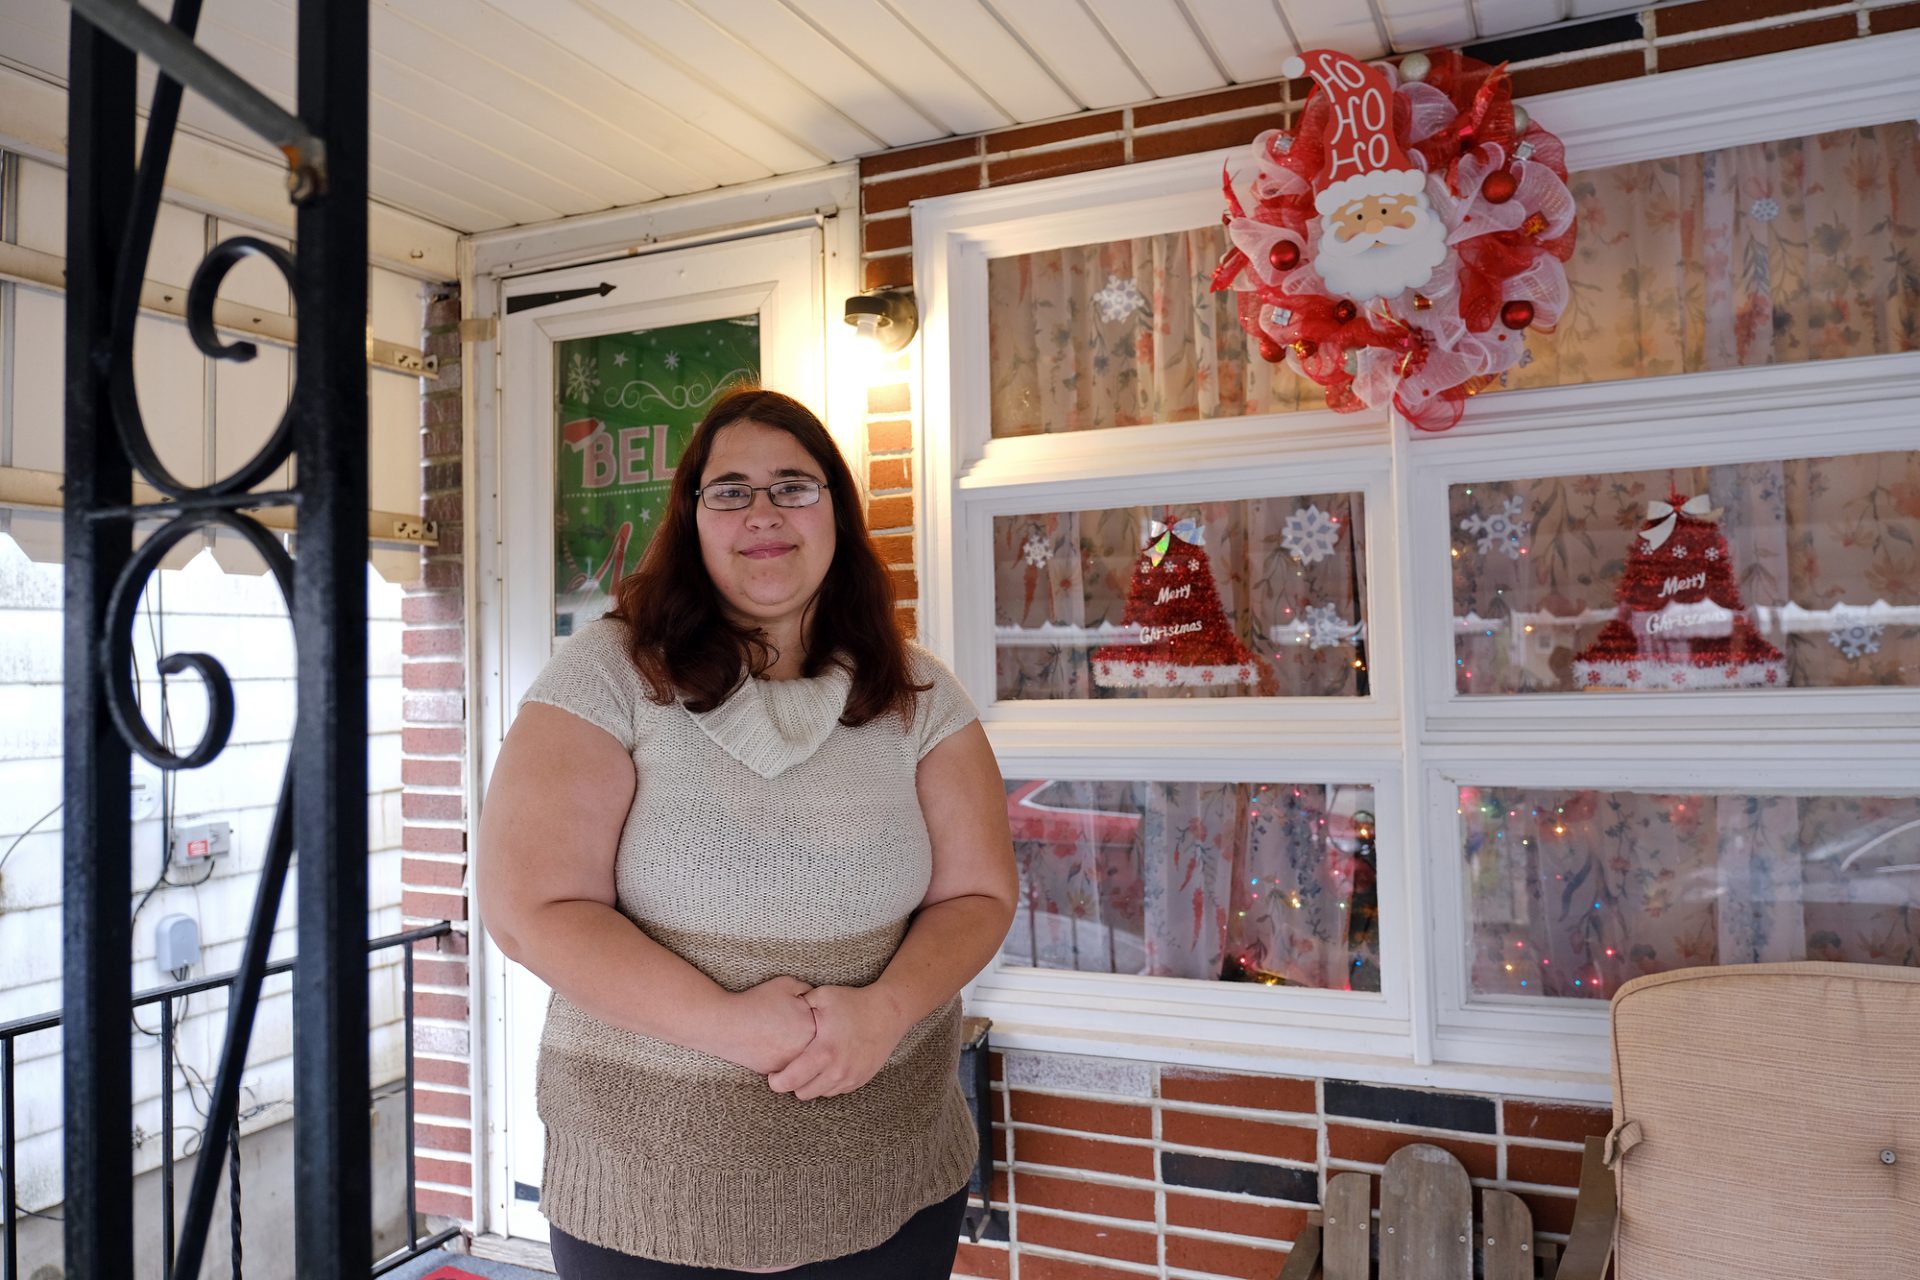 23-year-old Carissa Coolbaugh talks about her experiences as a Temporary Assistance for Needy Families (TANF) recipient Dec. 17, 2019, while at her home in Hanover Township, Luzerne County, Pennsylvania.